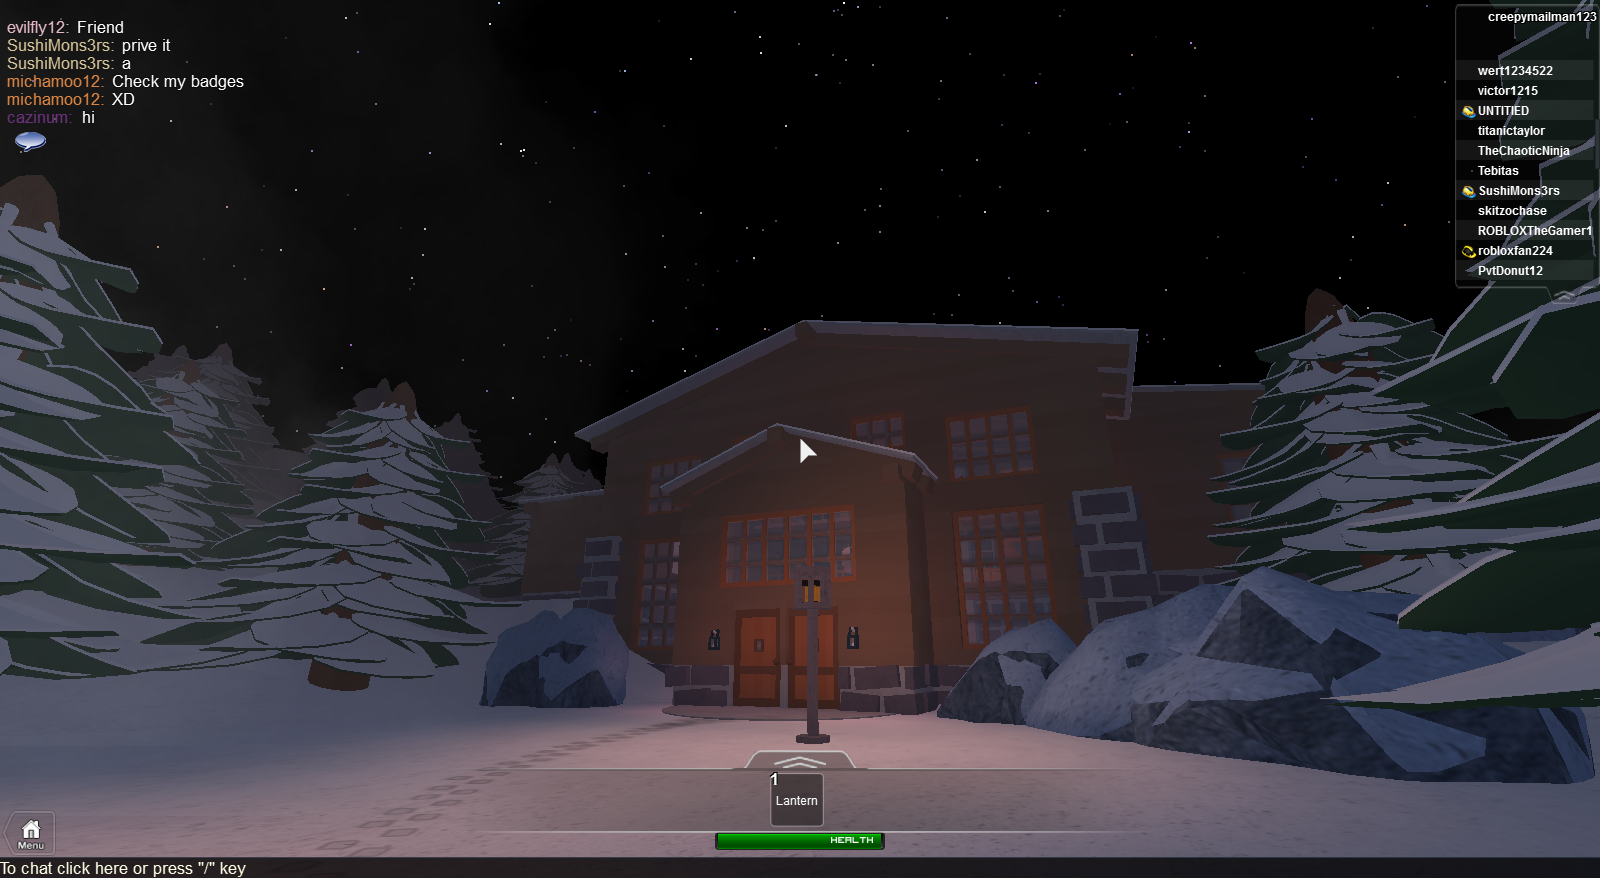 The Roblox Winter Games